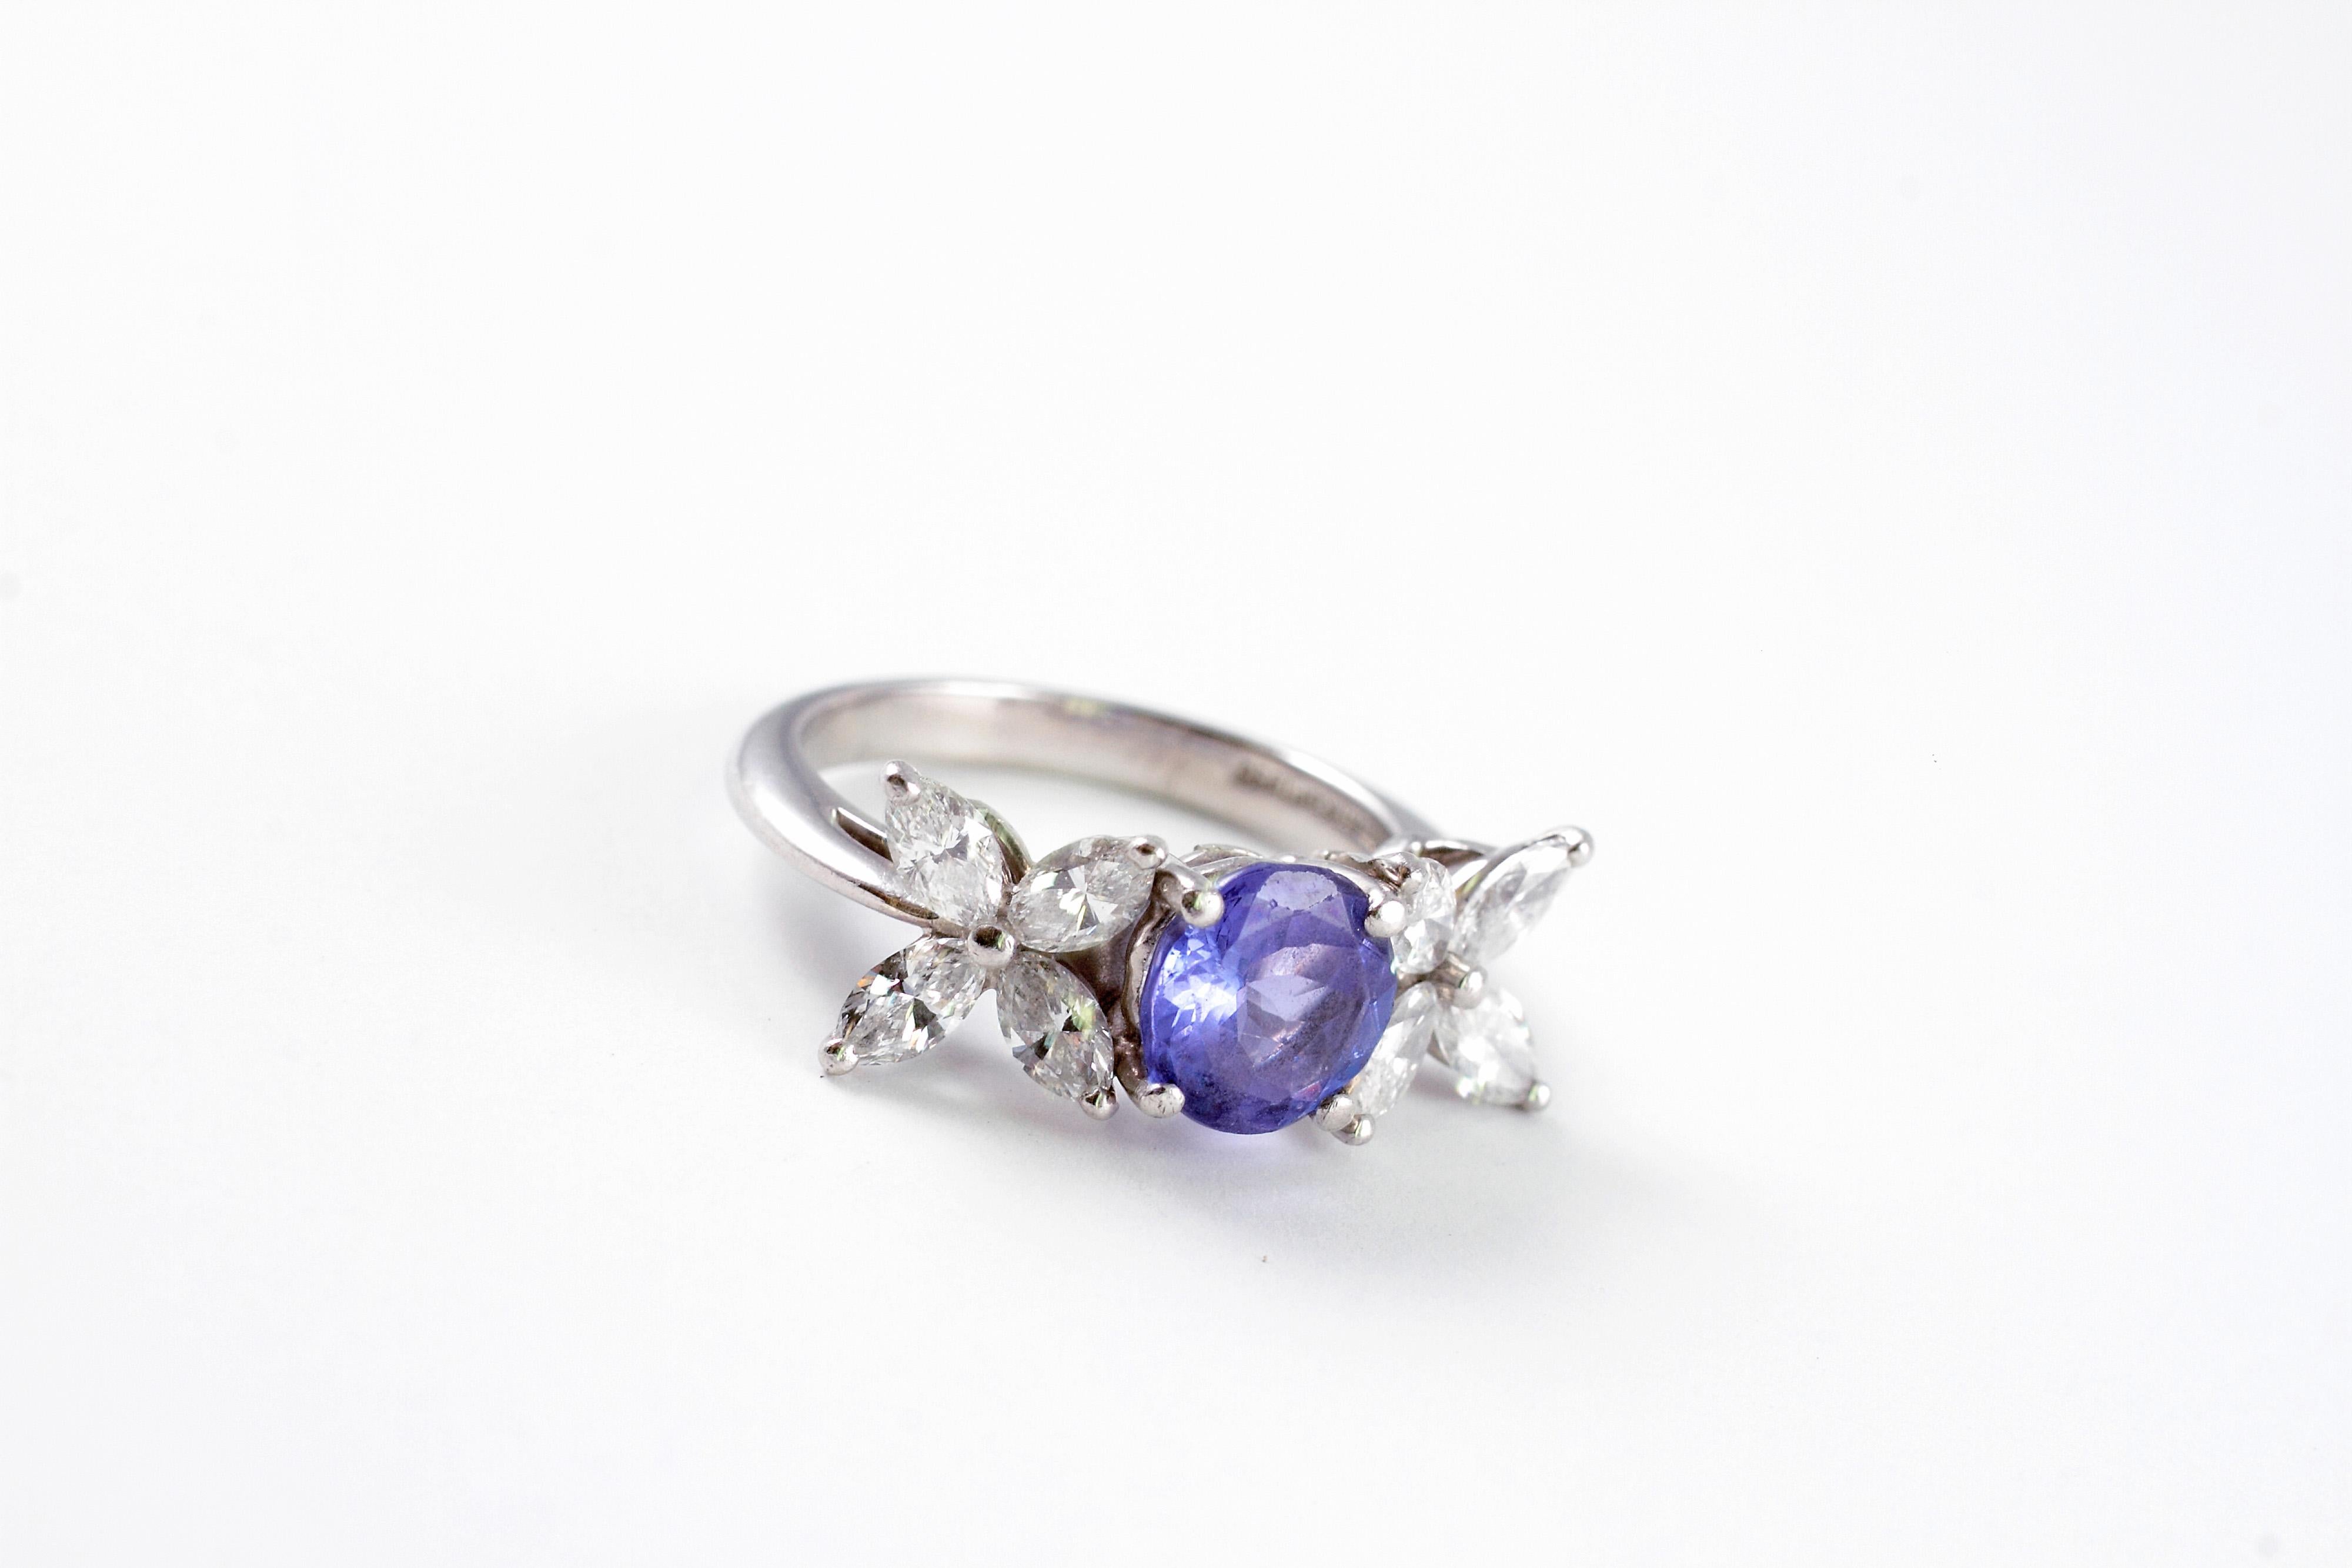 A beautiful Tanzanite and Diamond Ring by Tiffany & Co., set in Platinum from the 